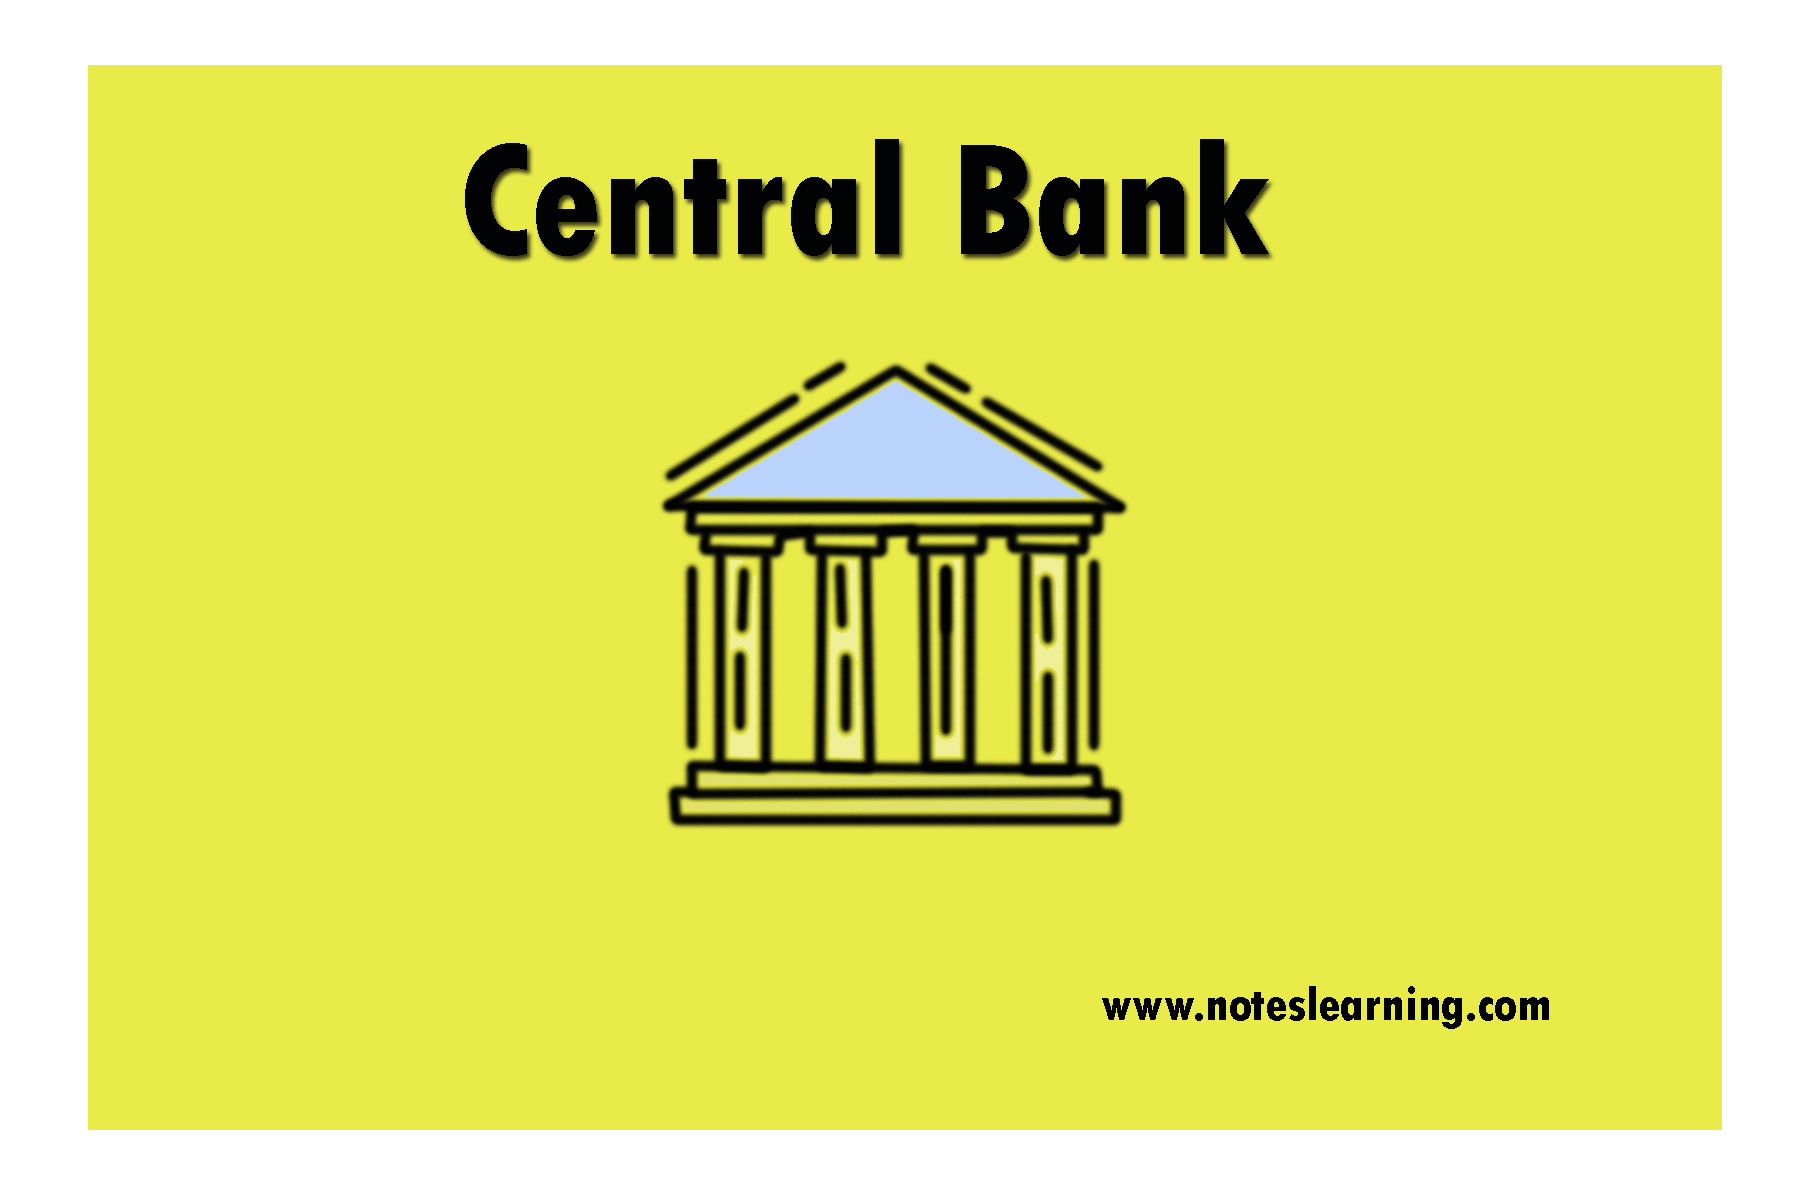 Central Bank: Introduction and Function - Notes Learning